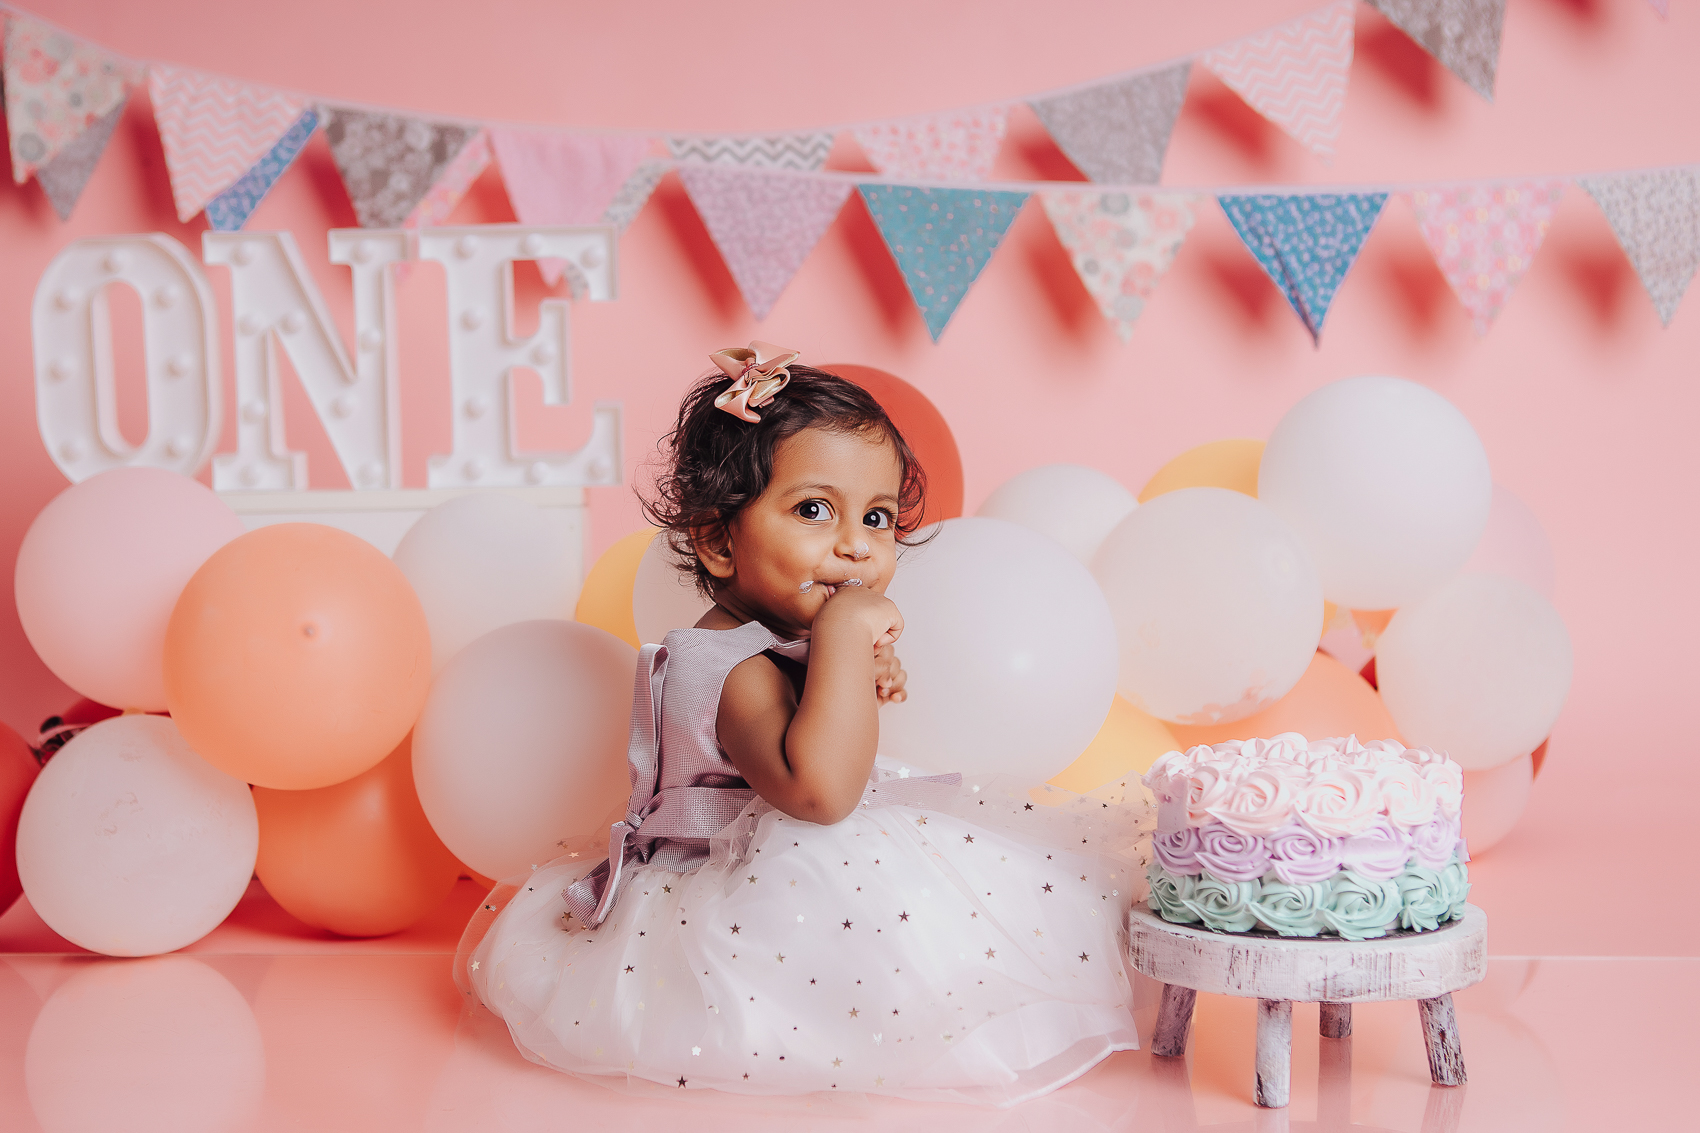 penang baby turns one photography